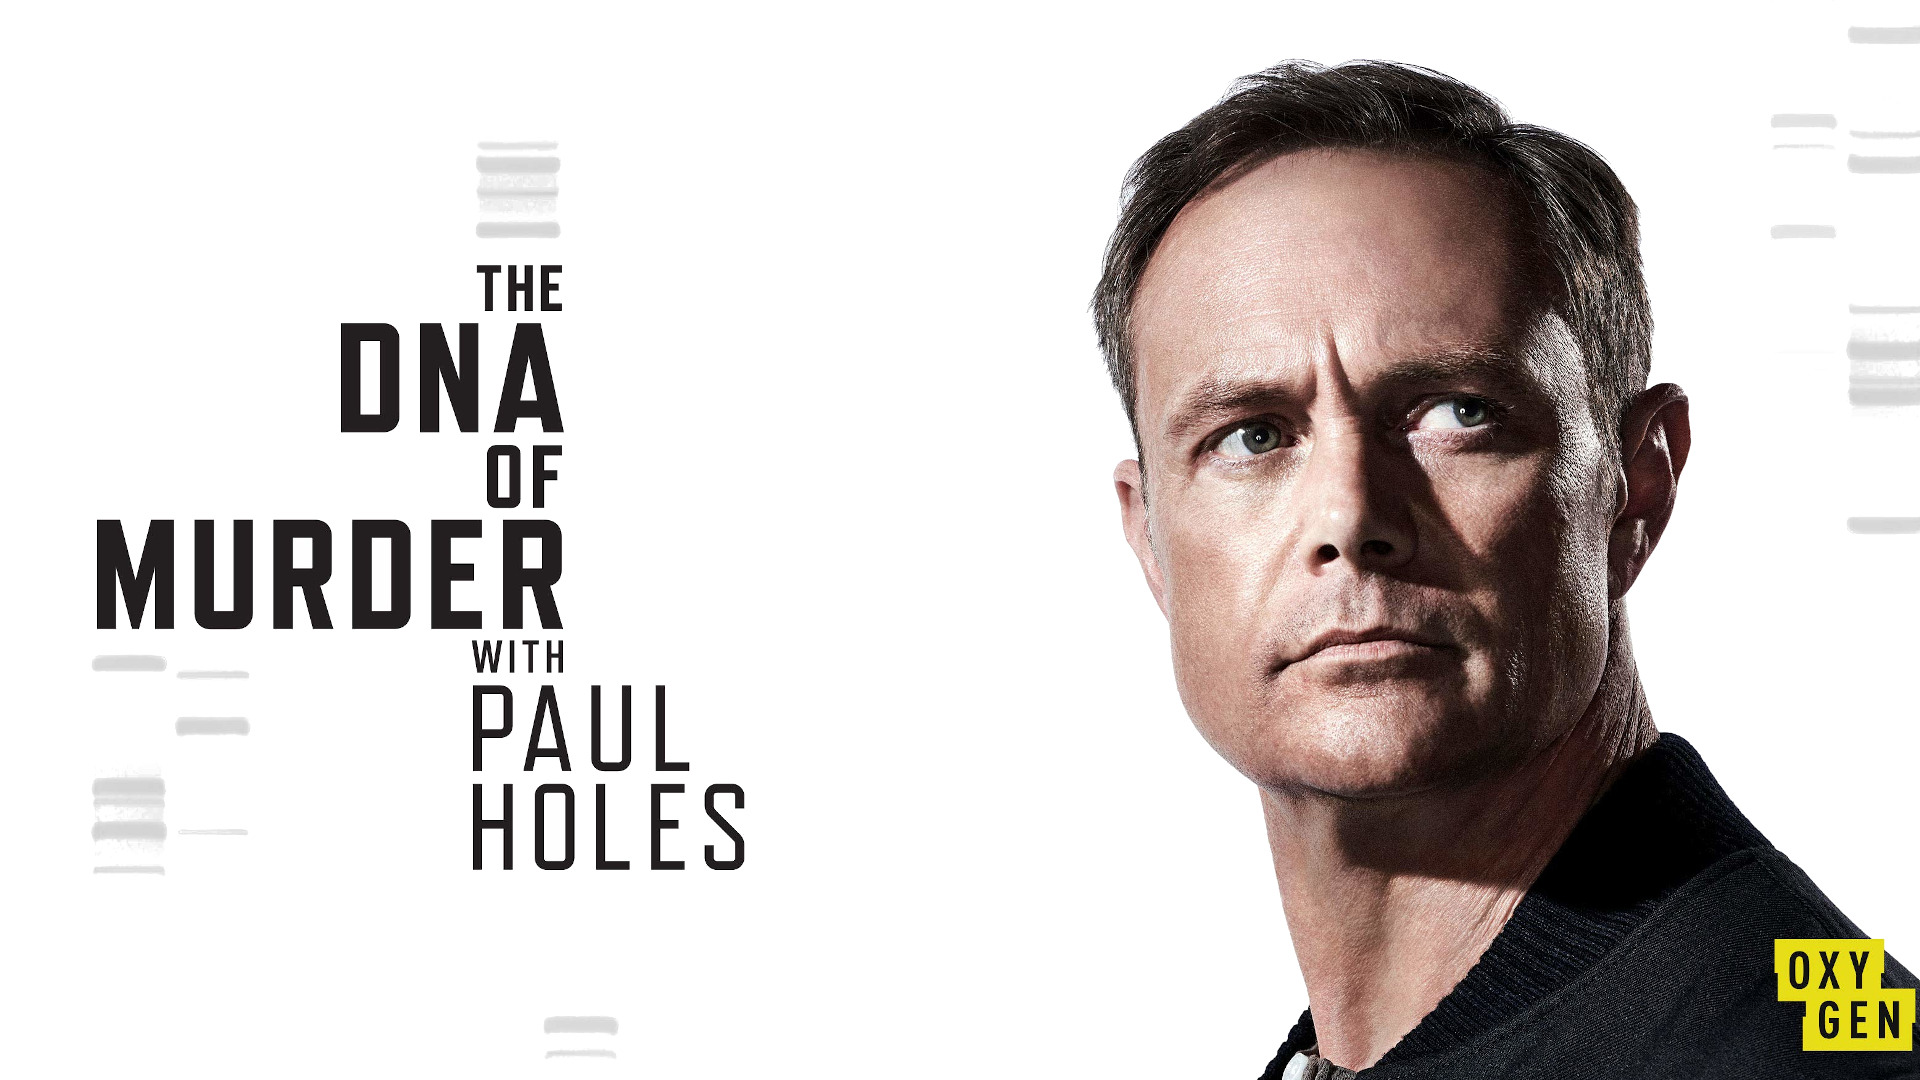 Show The DNA of Murder with Paul Holes